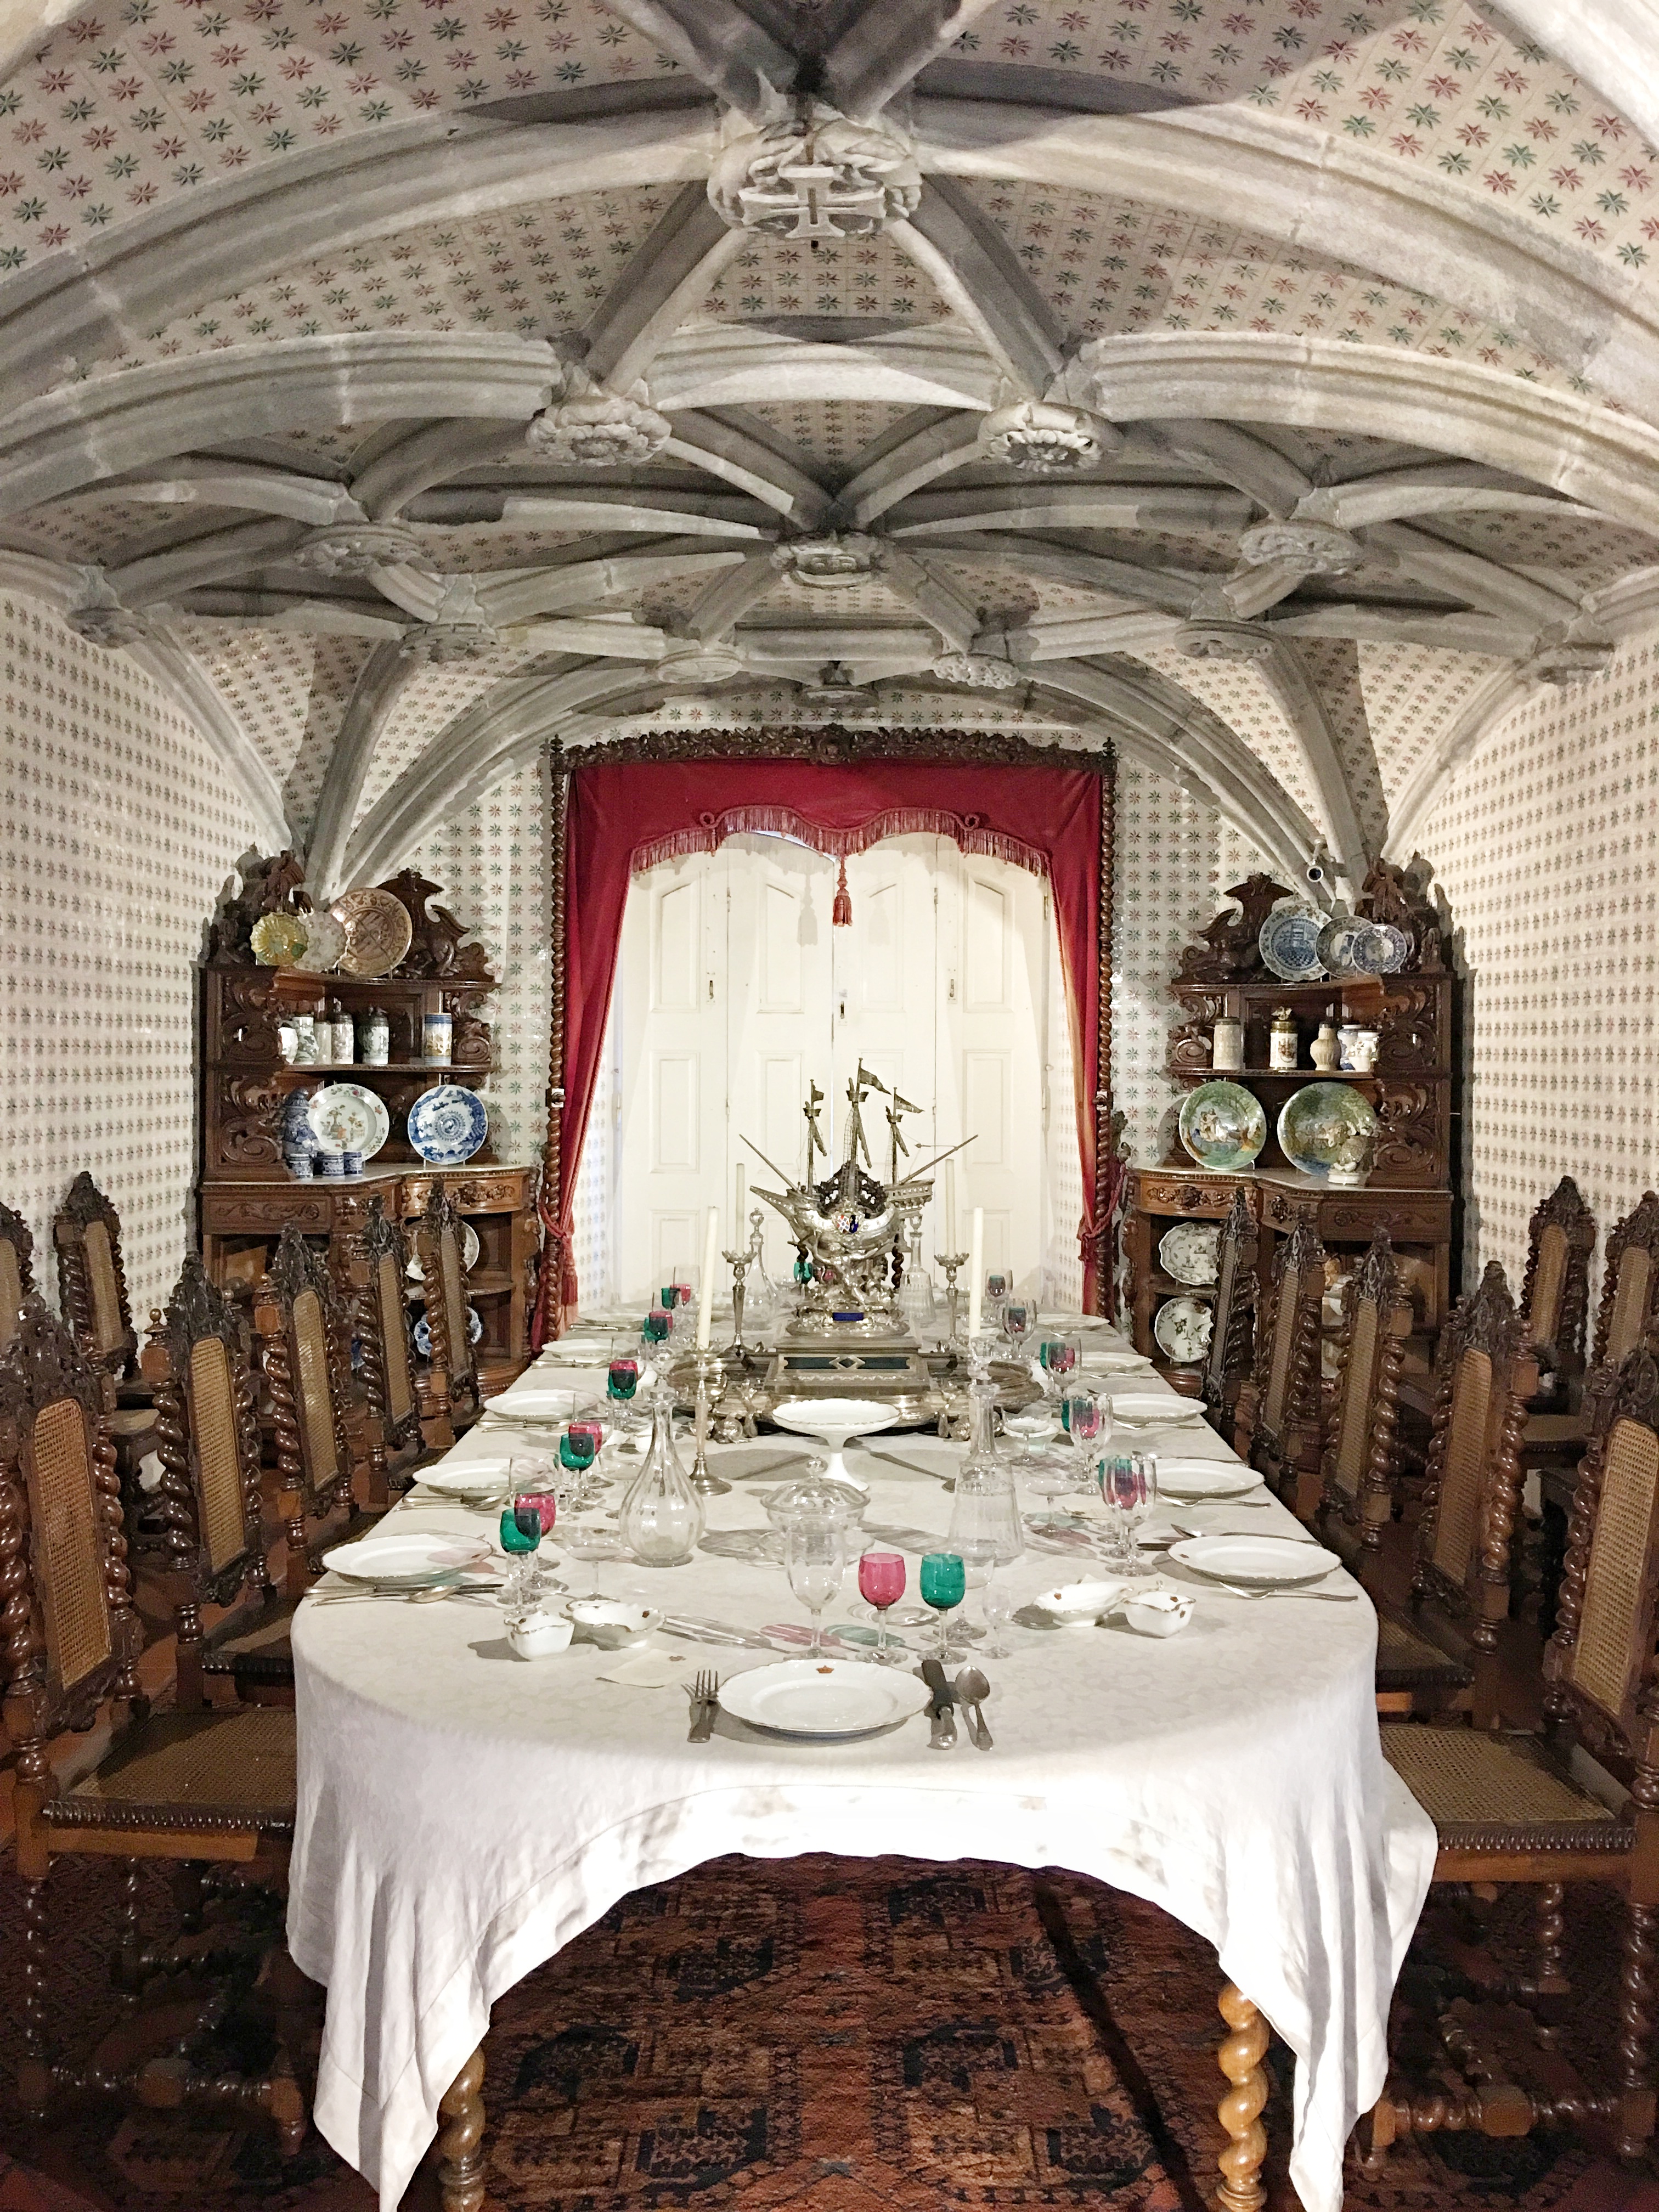 Dining quarters in Pena Palace